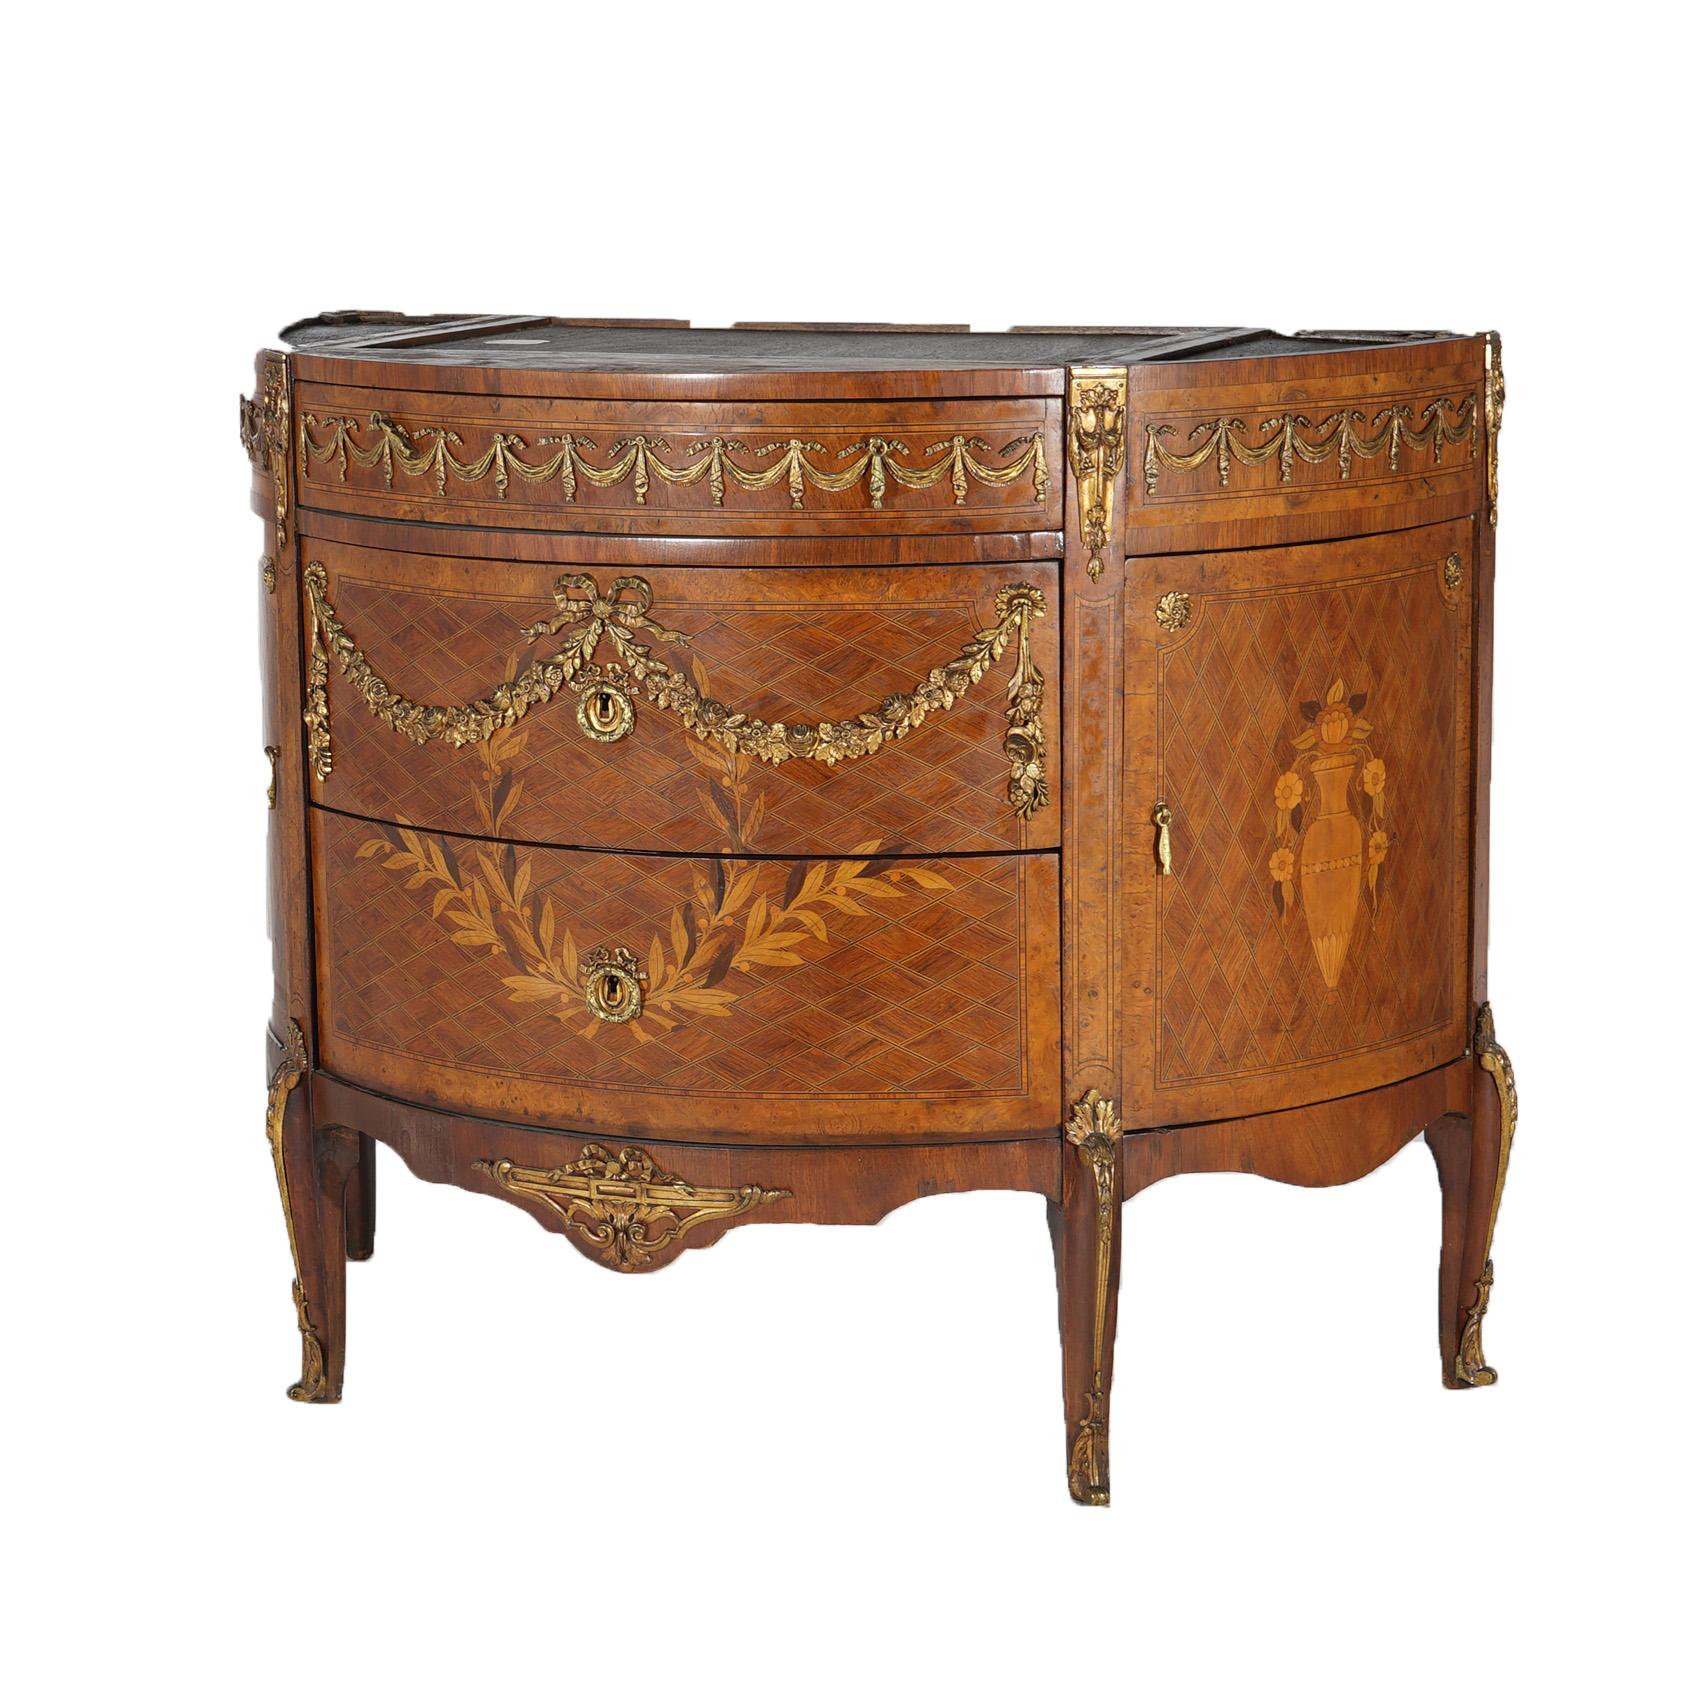 Antique French Louis XVI Kingwood Marquetry & Marble Console by Blanchet c1870 For Sale 4